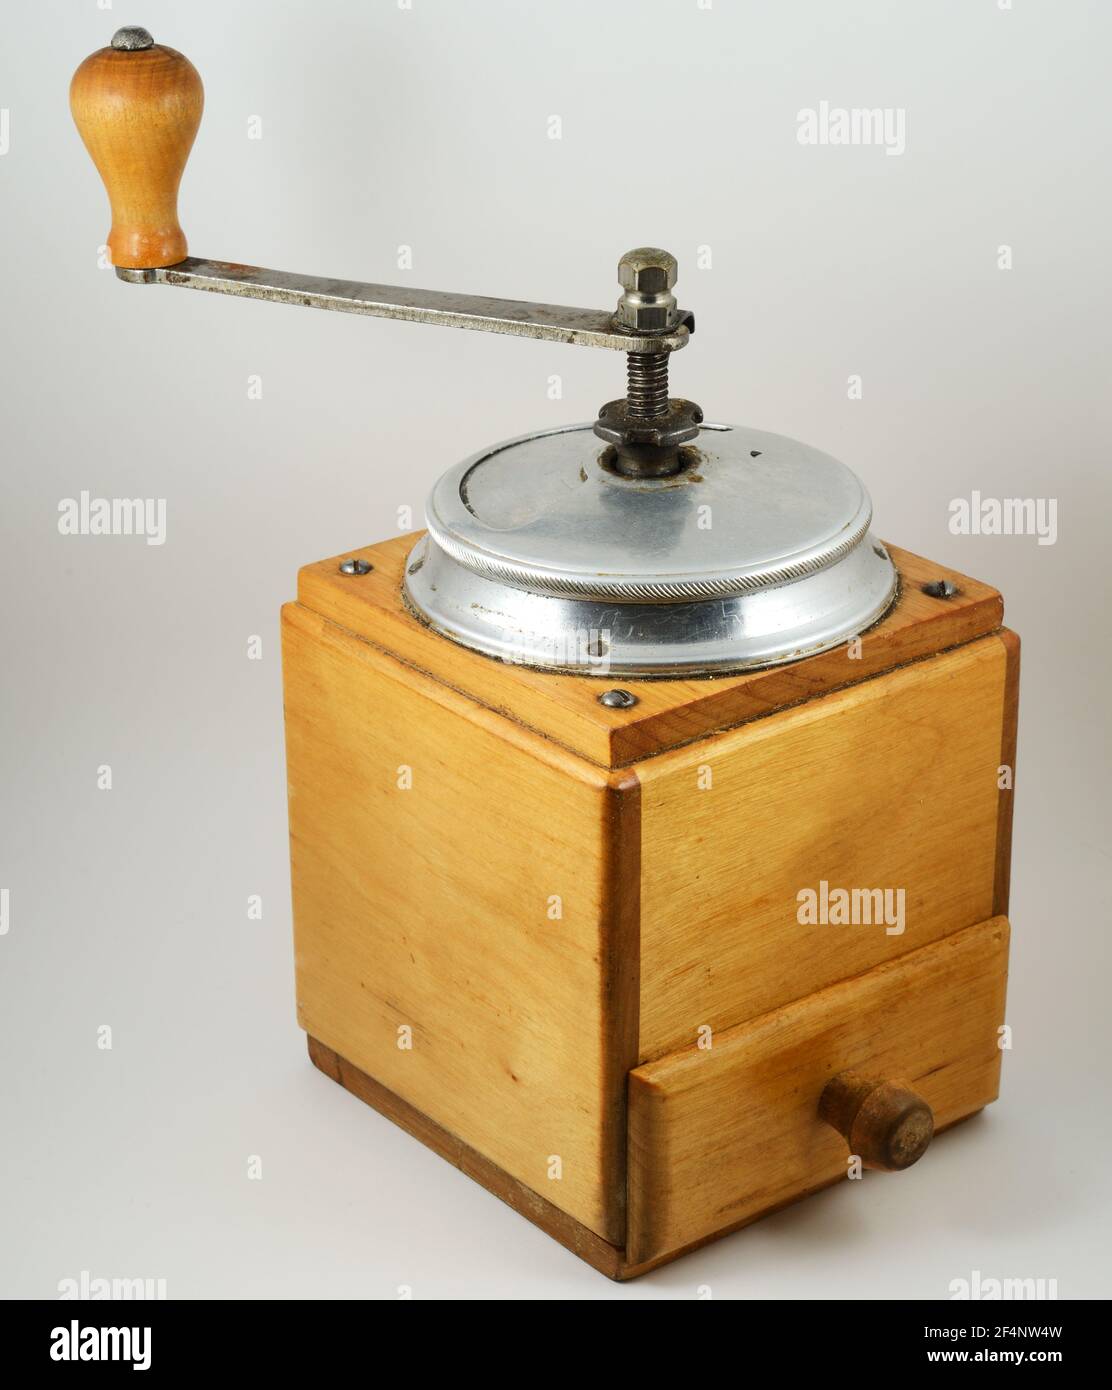 old vintage coffee grinder on a neutral background Stock Photo